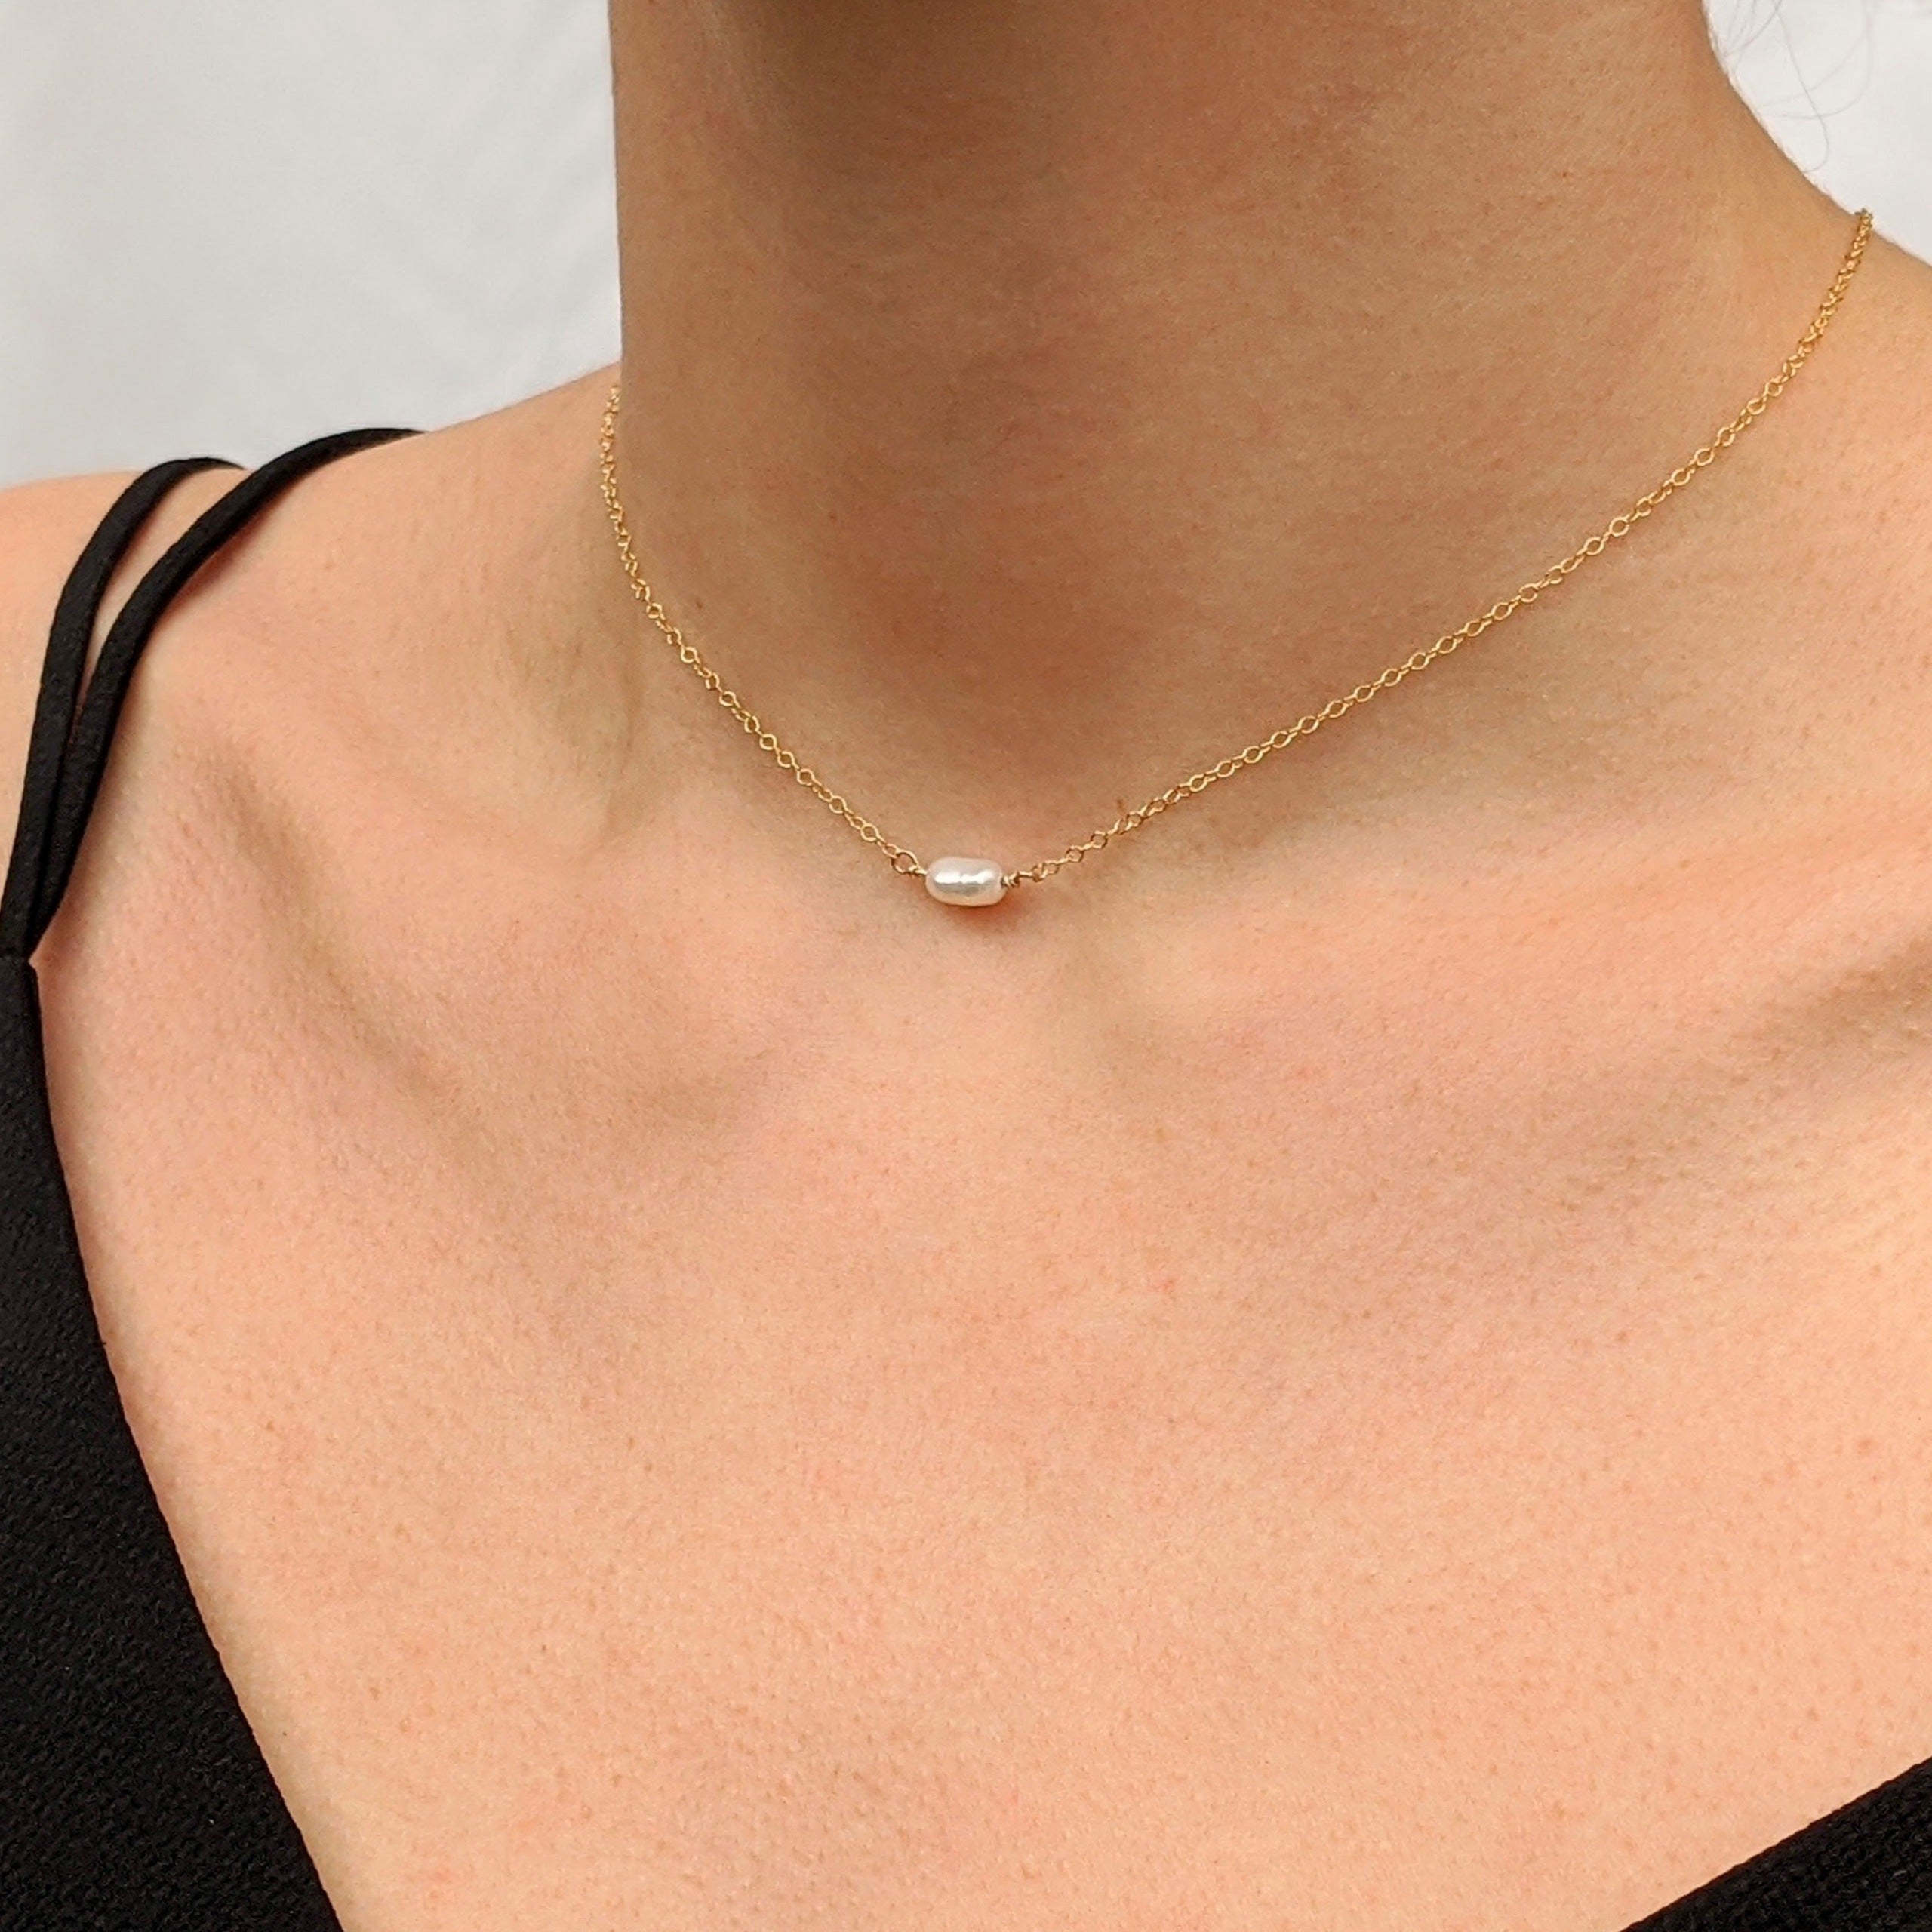 Single small pearl choker necklace in gold on model neck